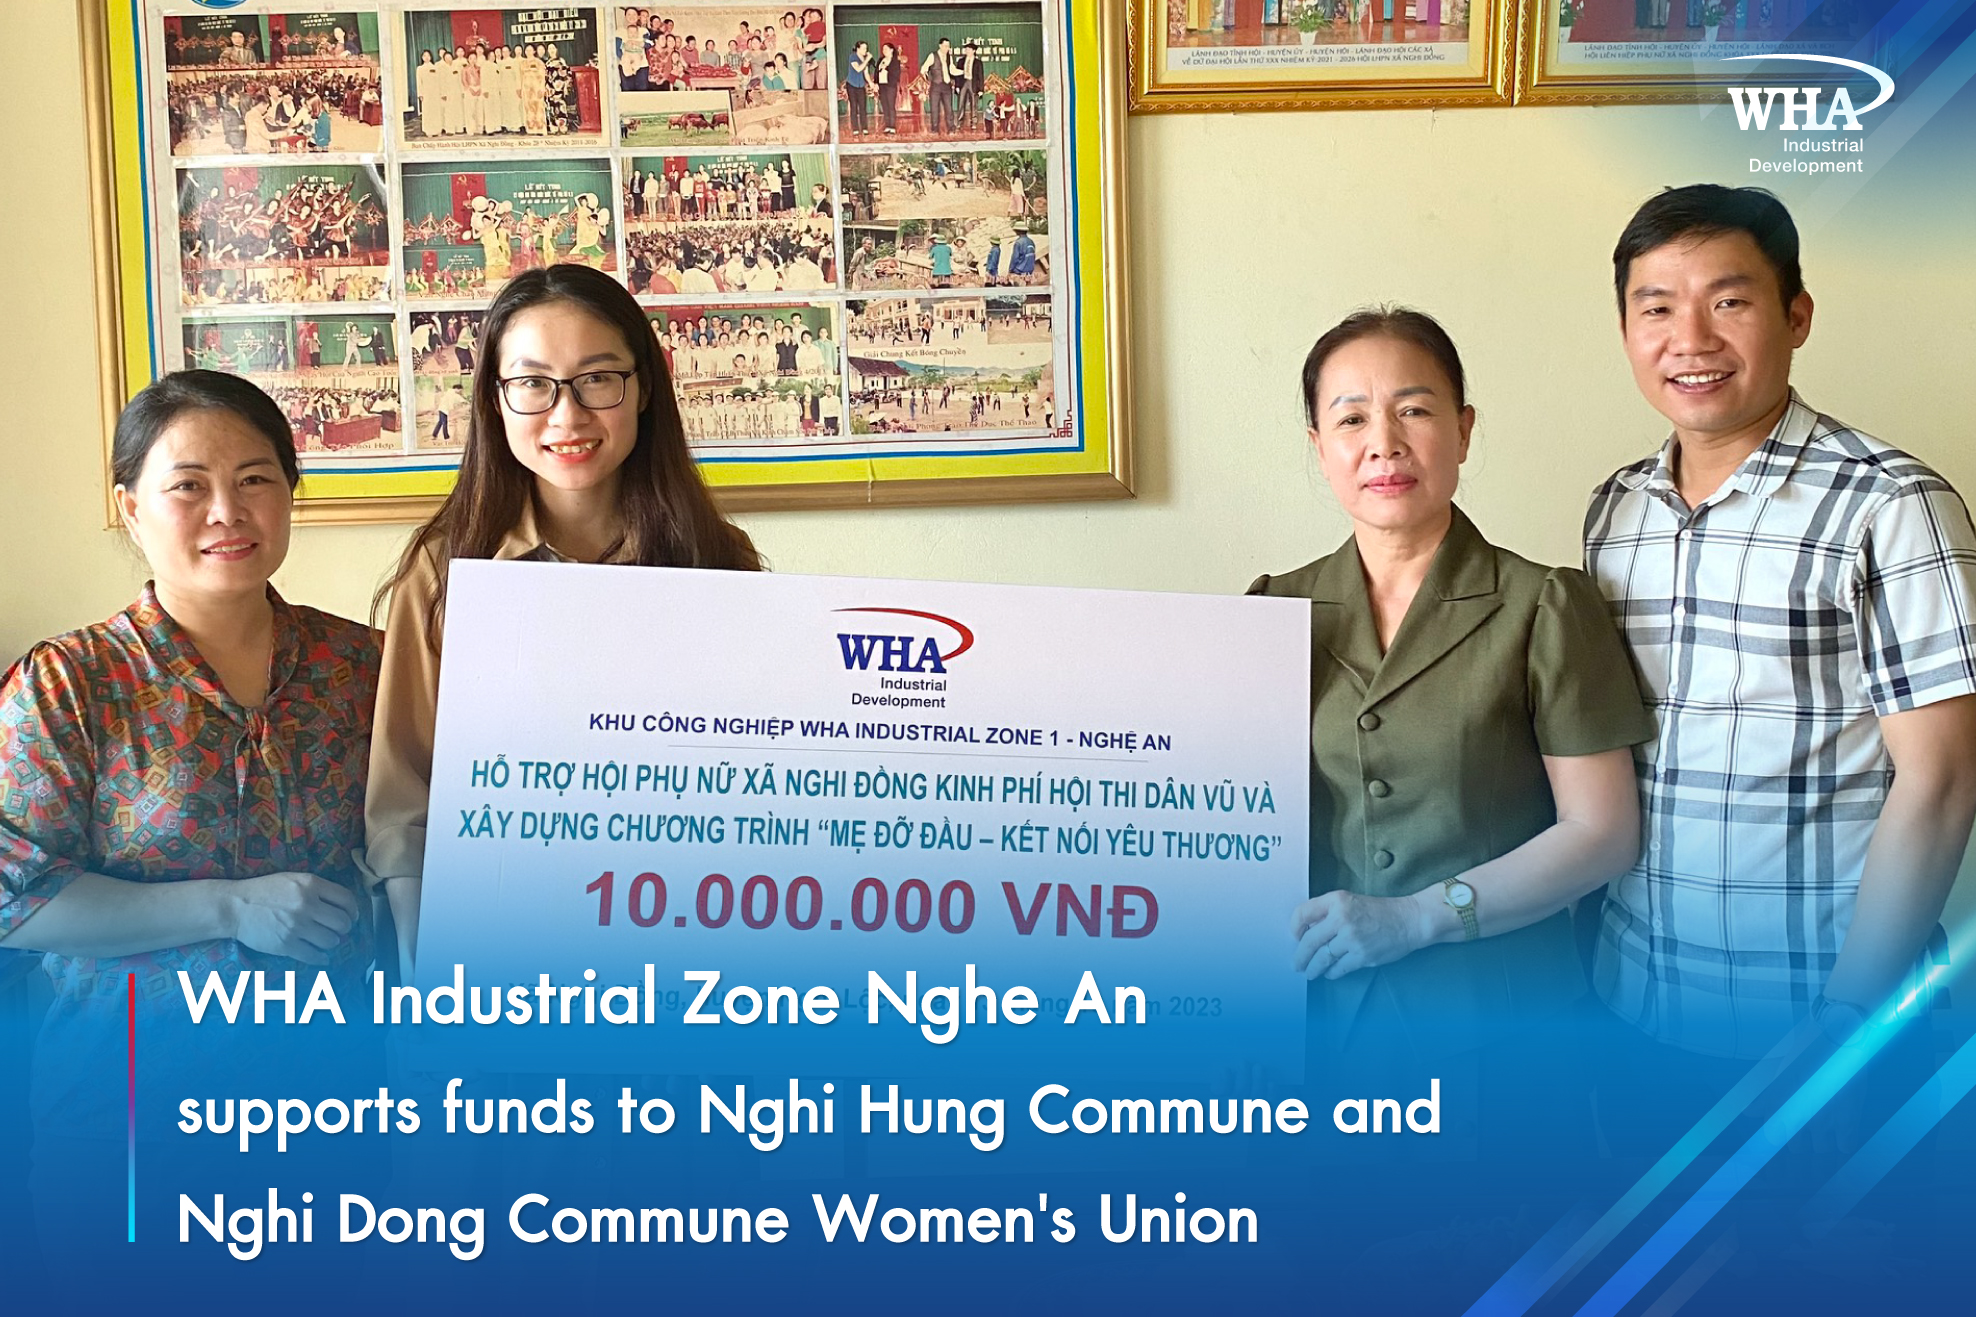 WHA Industrial Zone Nghe An supports funds to Nghi Hung Commune and Nghi Dong Commune Women's Union